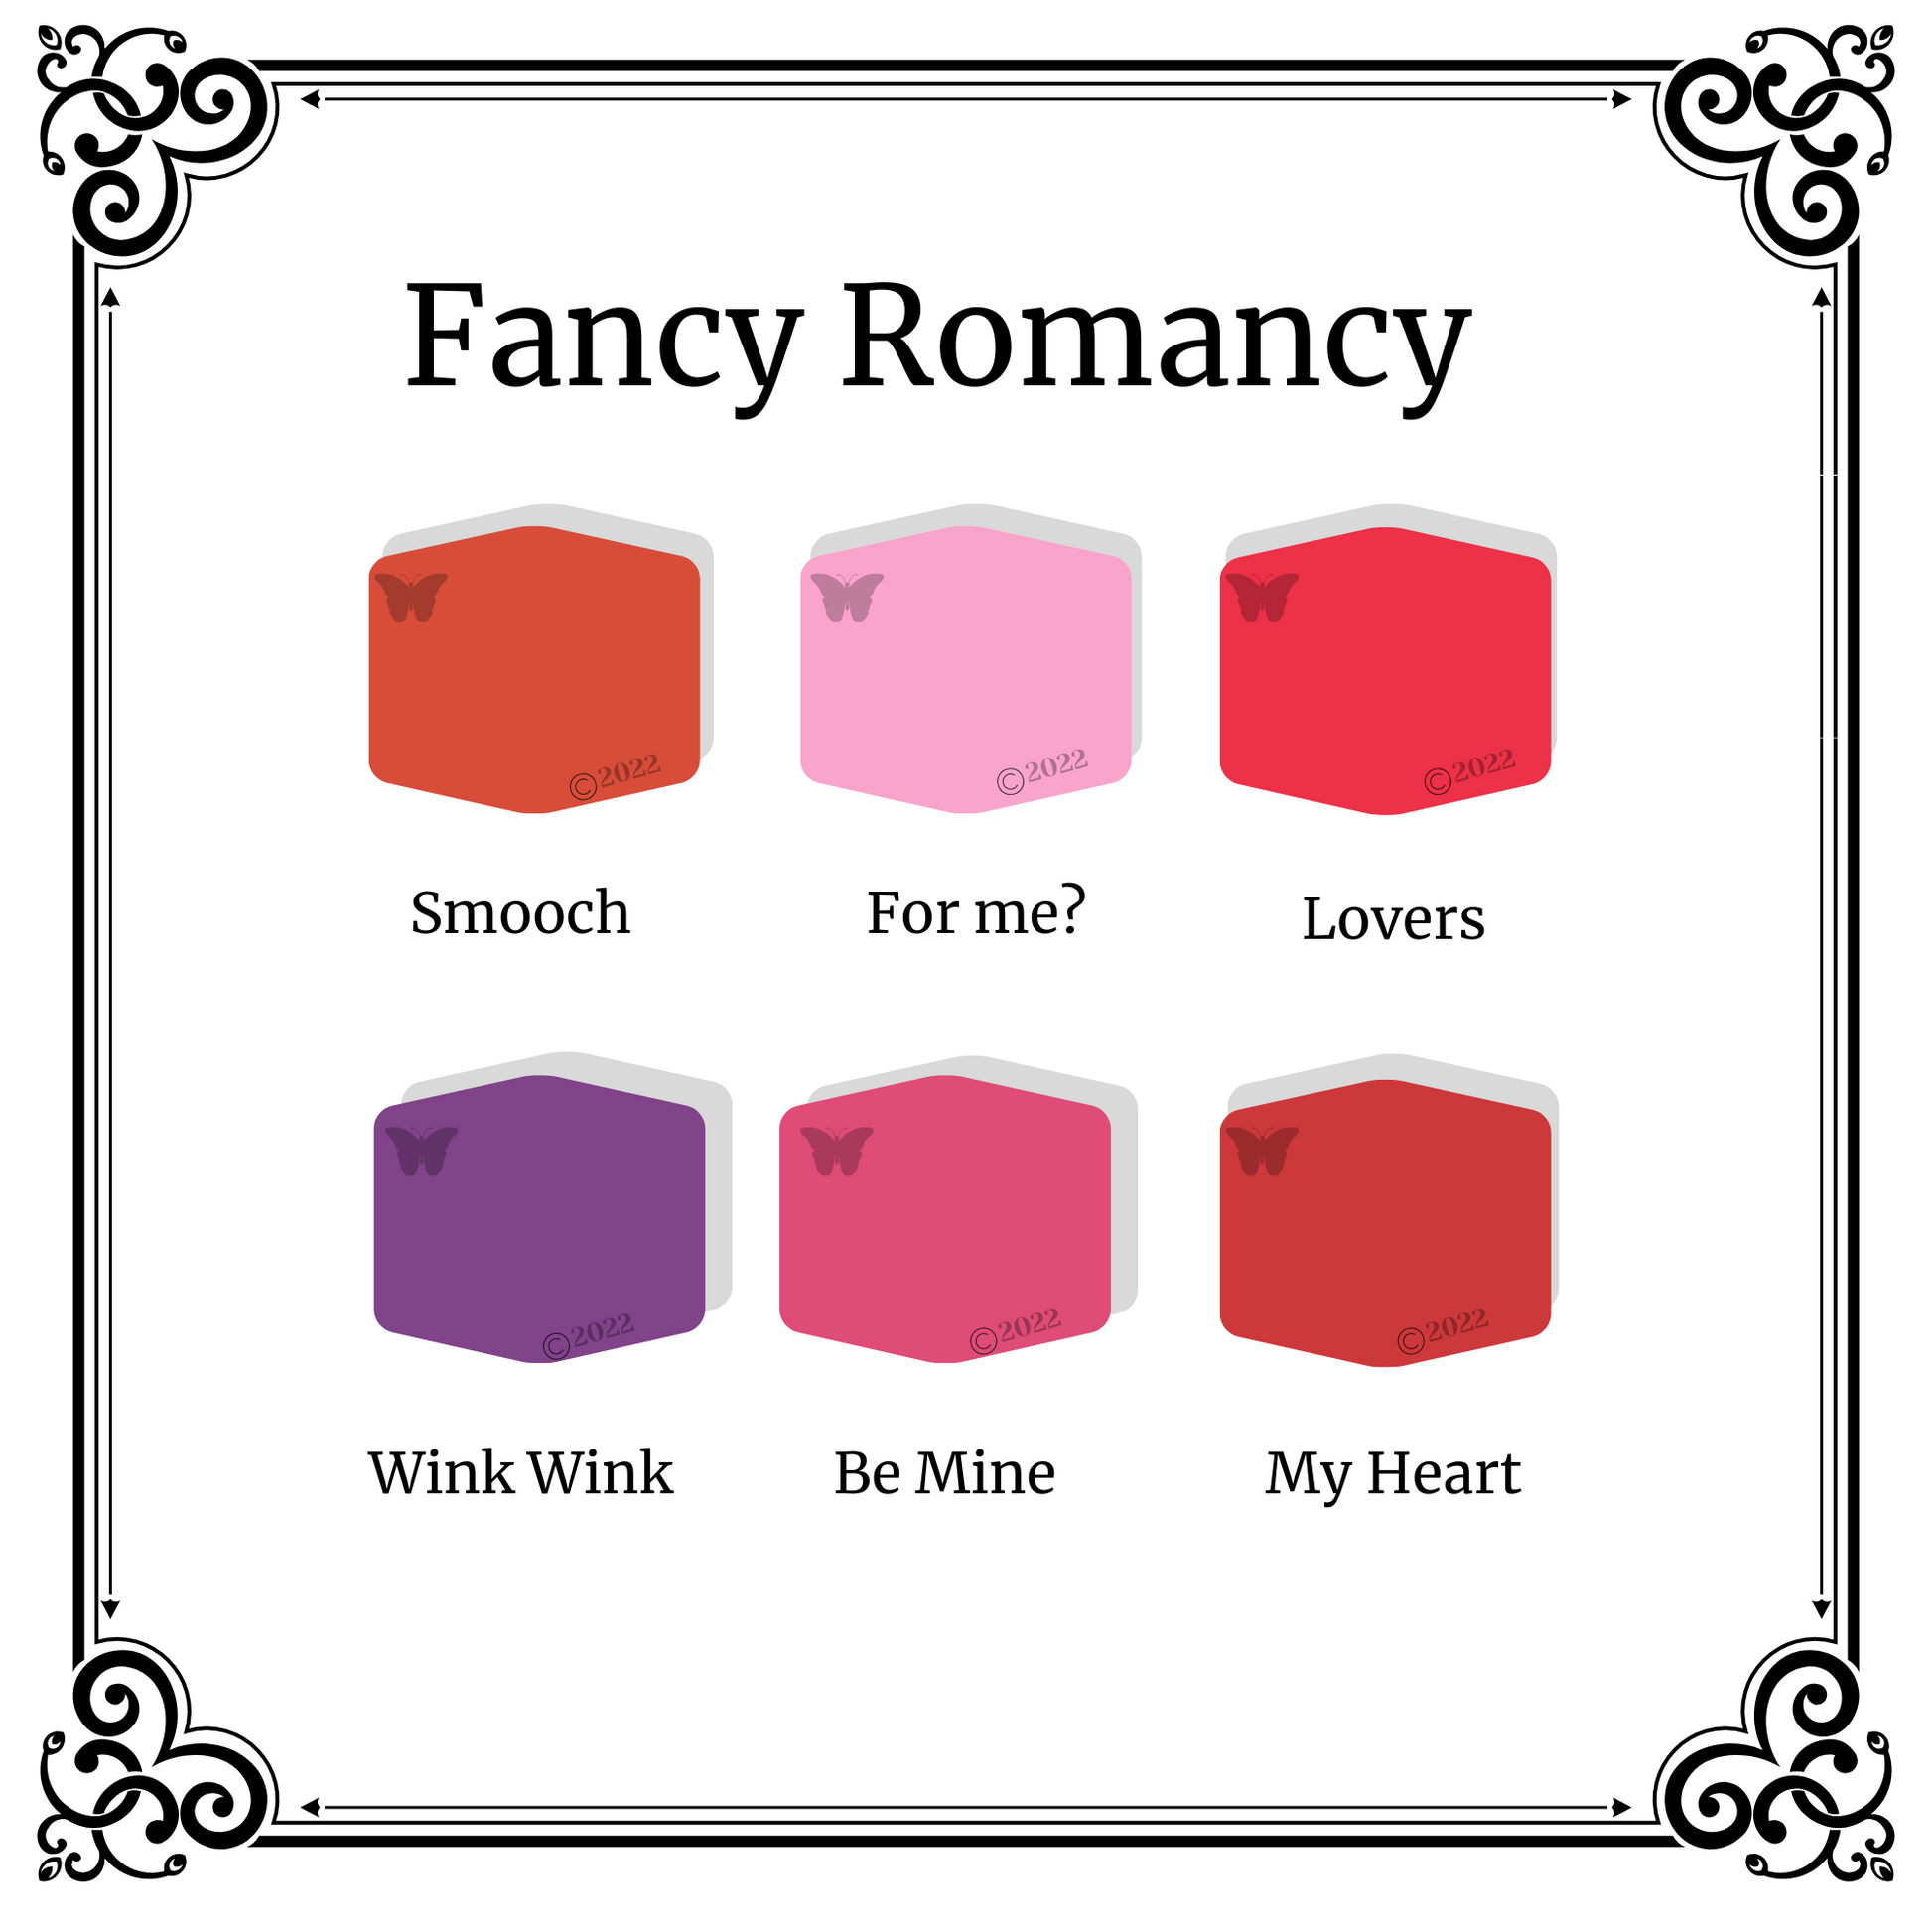 In this Fancy Romancy palette the 6 colors are Smooch, For me?, Lovers, Wink Wink, Be Mine and My Heart